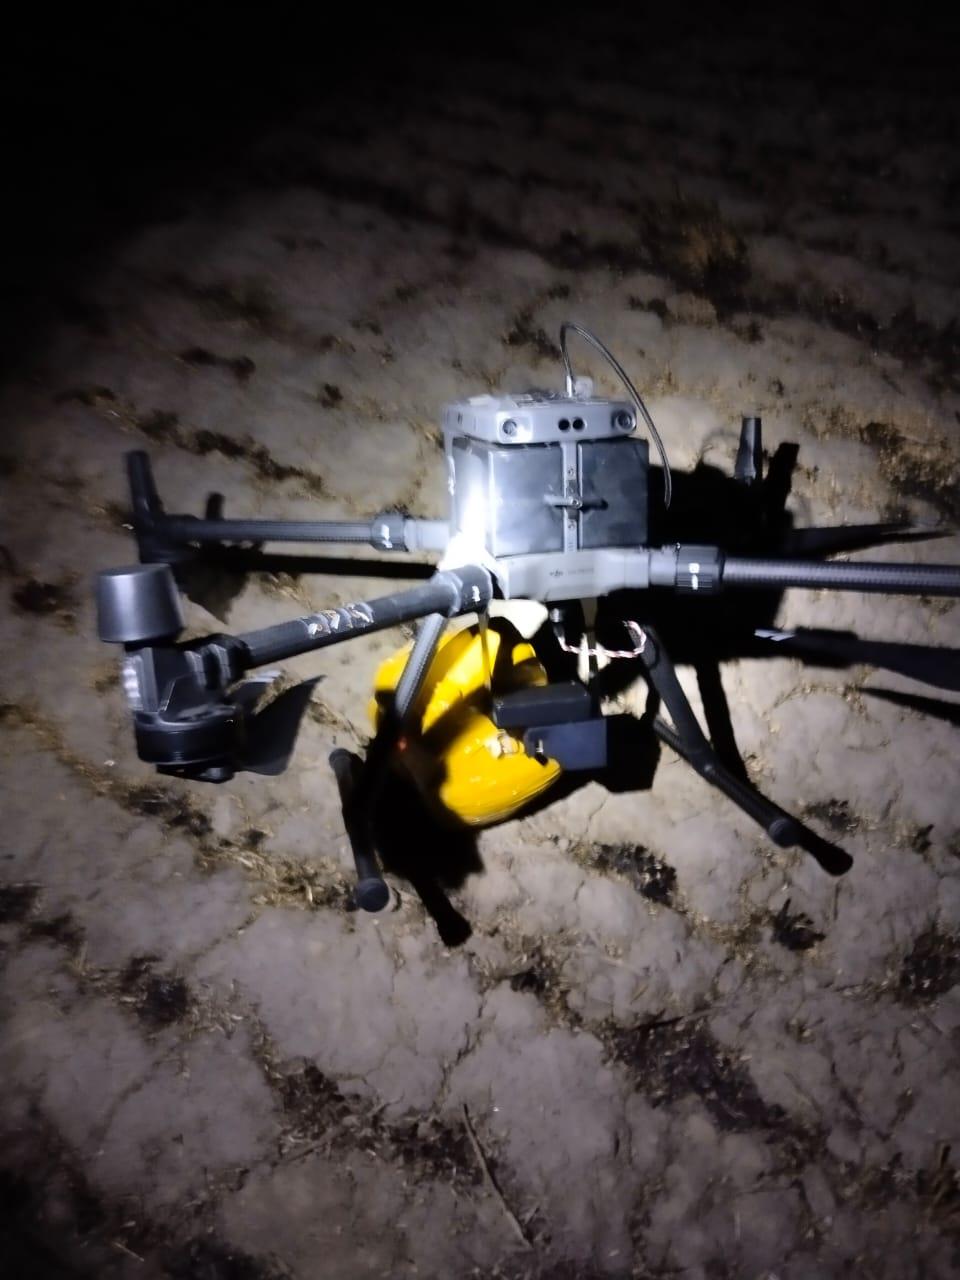 BSF shoots down drone near border in Amritsar Sector, seizes over 3-kg drugs